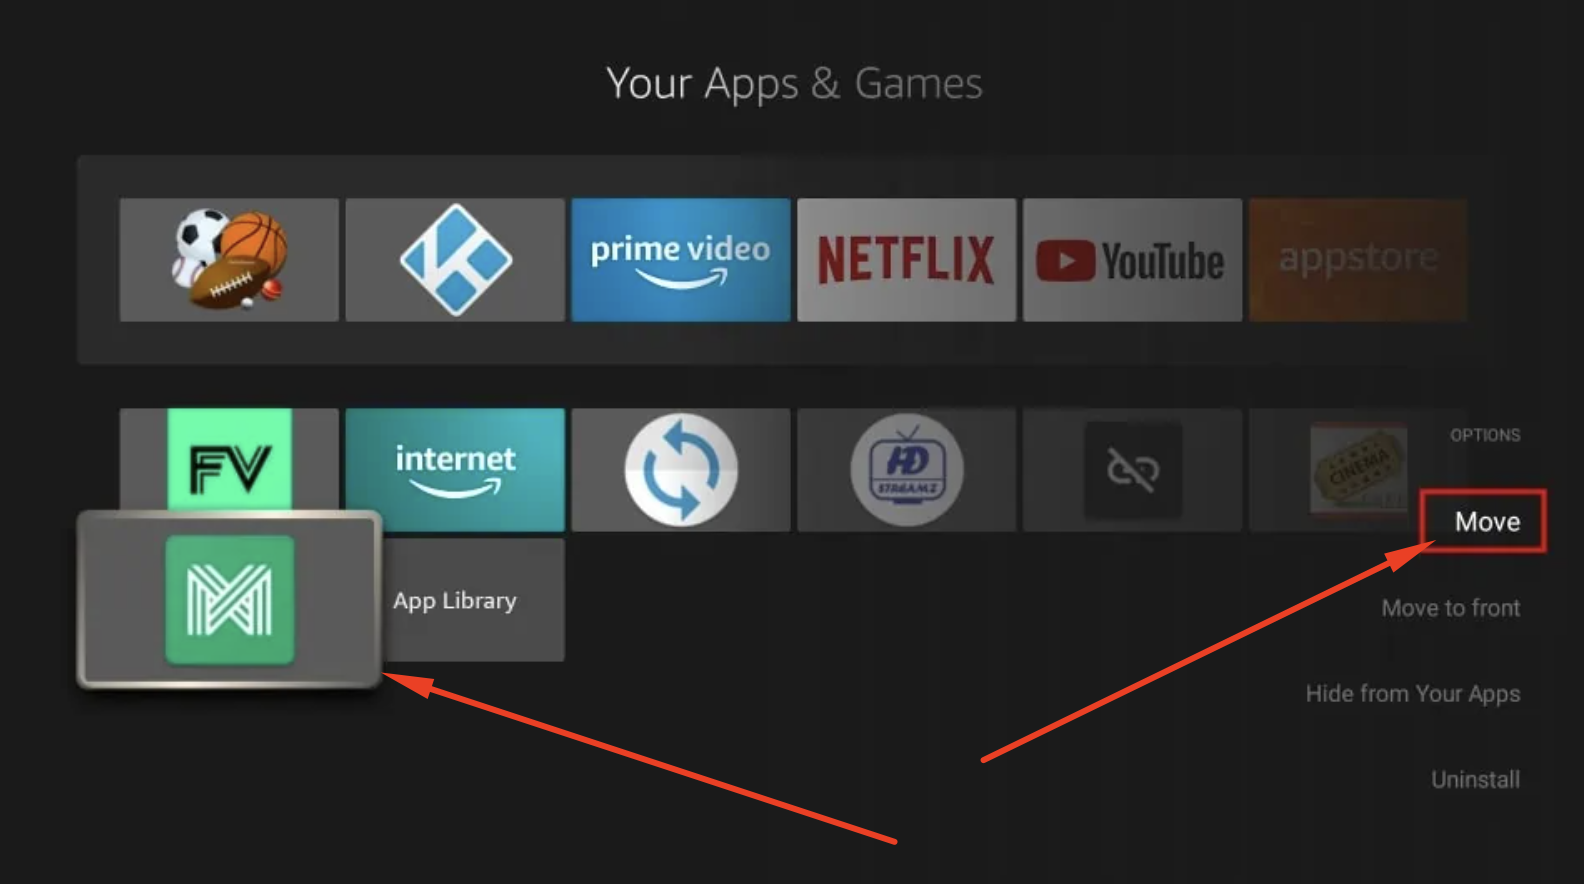 Option to Move AppLinked on FireStick Homepage